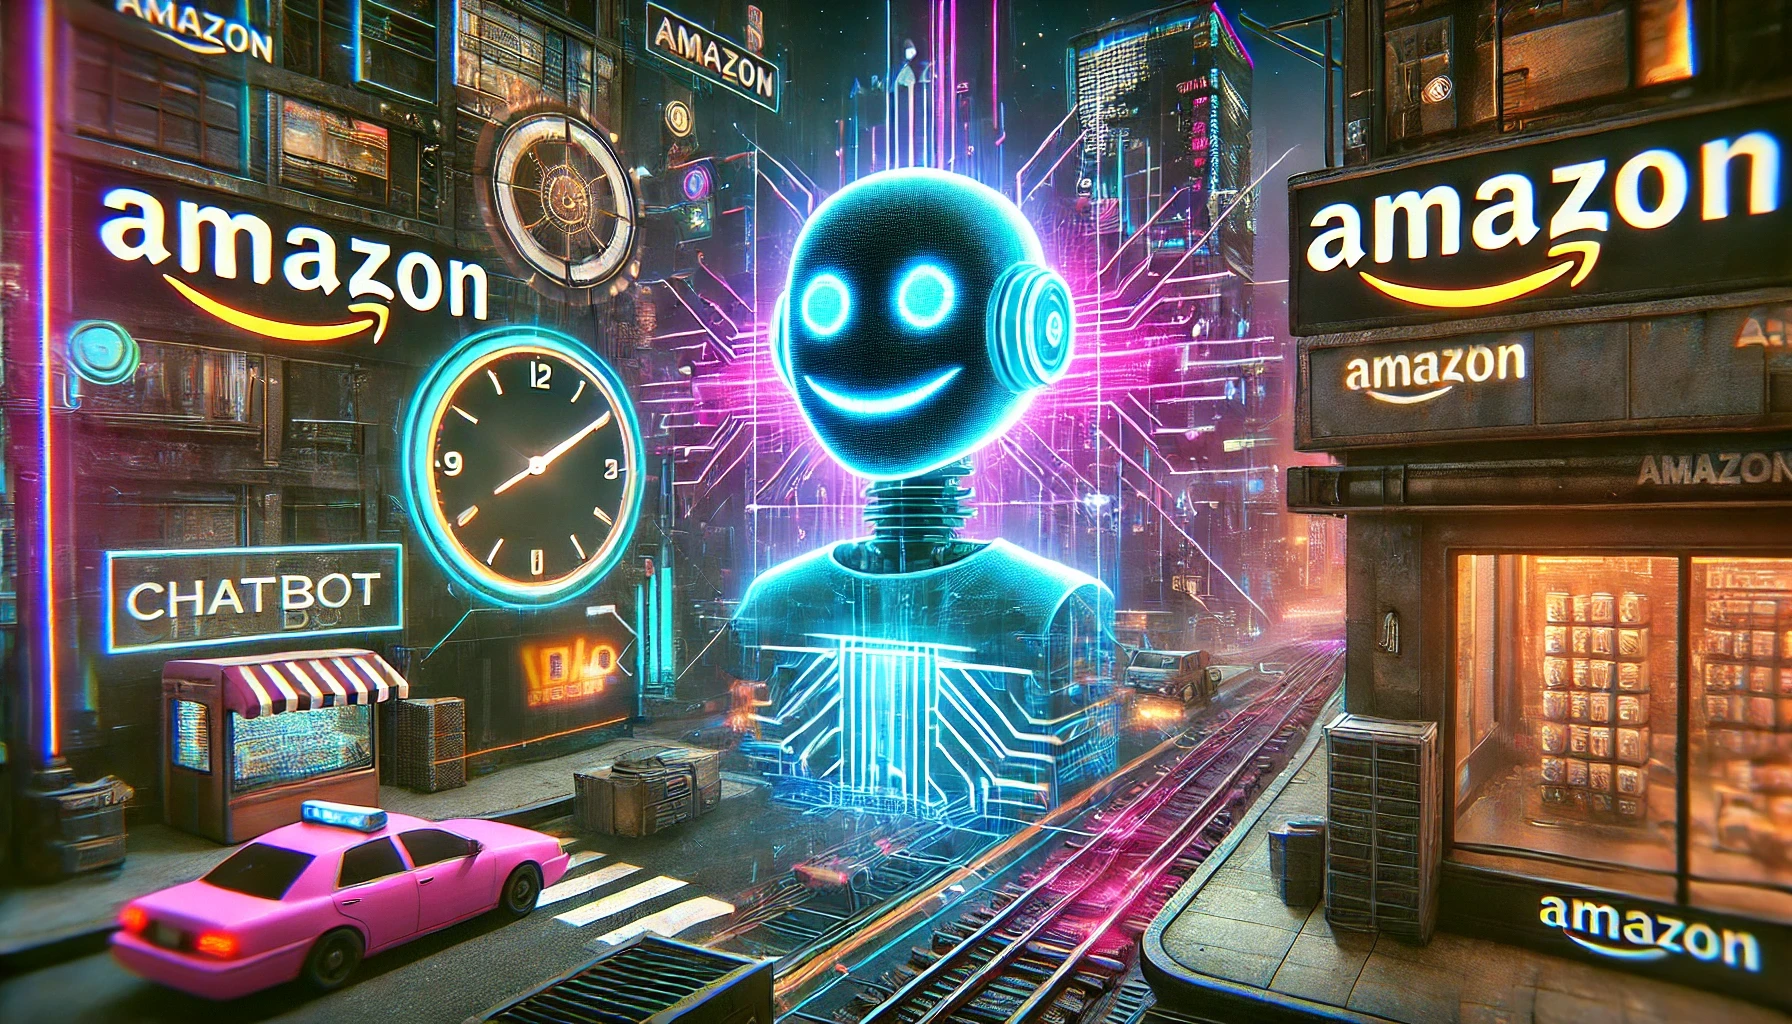 Amazon is creating its own AI chatbot to rival ChatGPT, but is the timing right?